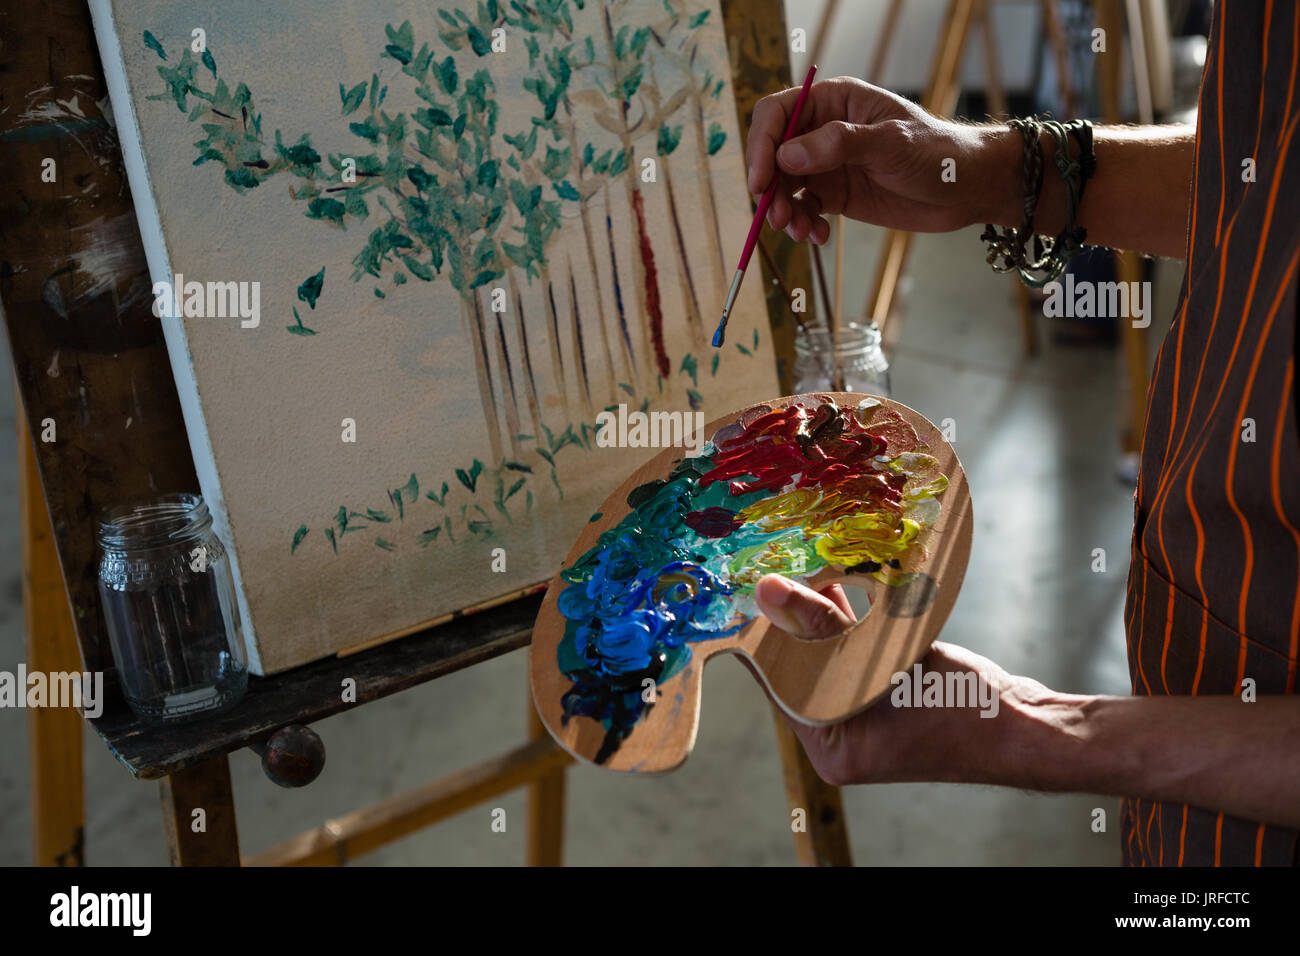 Cropped image of artist paining on canvas in art class Stock Photo